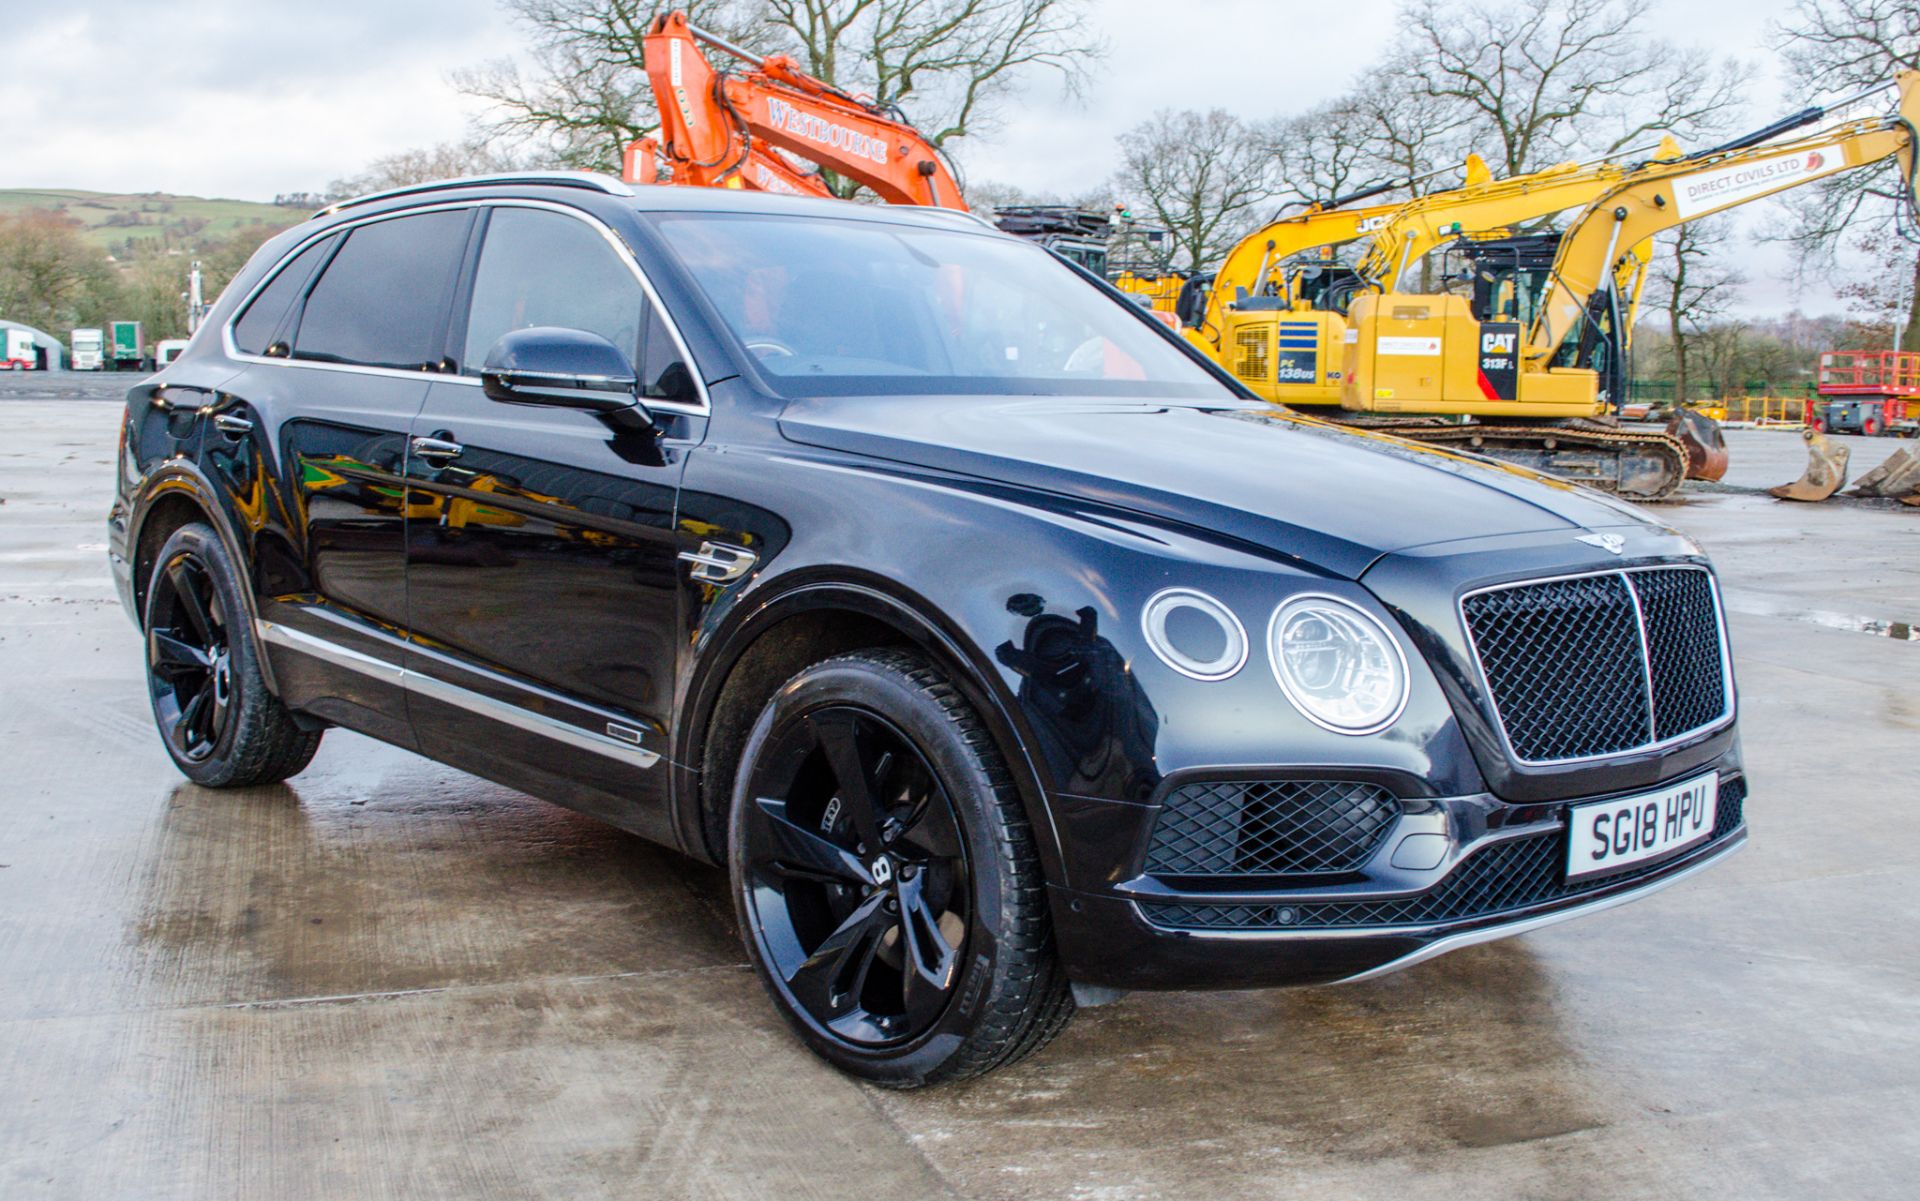 Bentley Bentayga 4.0 V8 diesel 4wd 7 seat SUV Reg No: SG 18 HPU Recorded Mileage: 37,650 Date of - Image 2 of 41